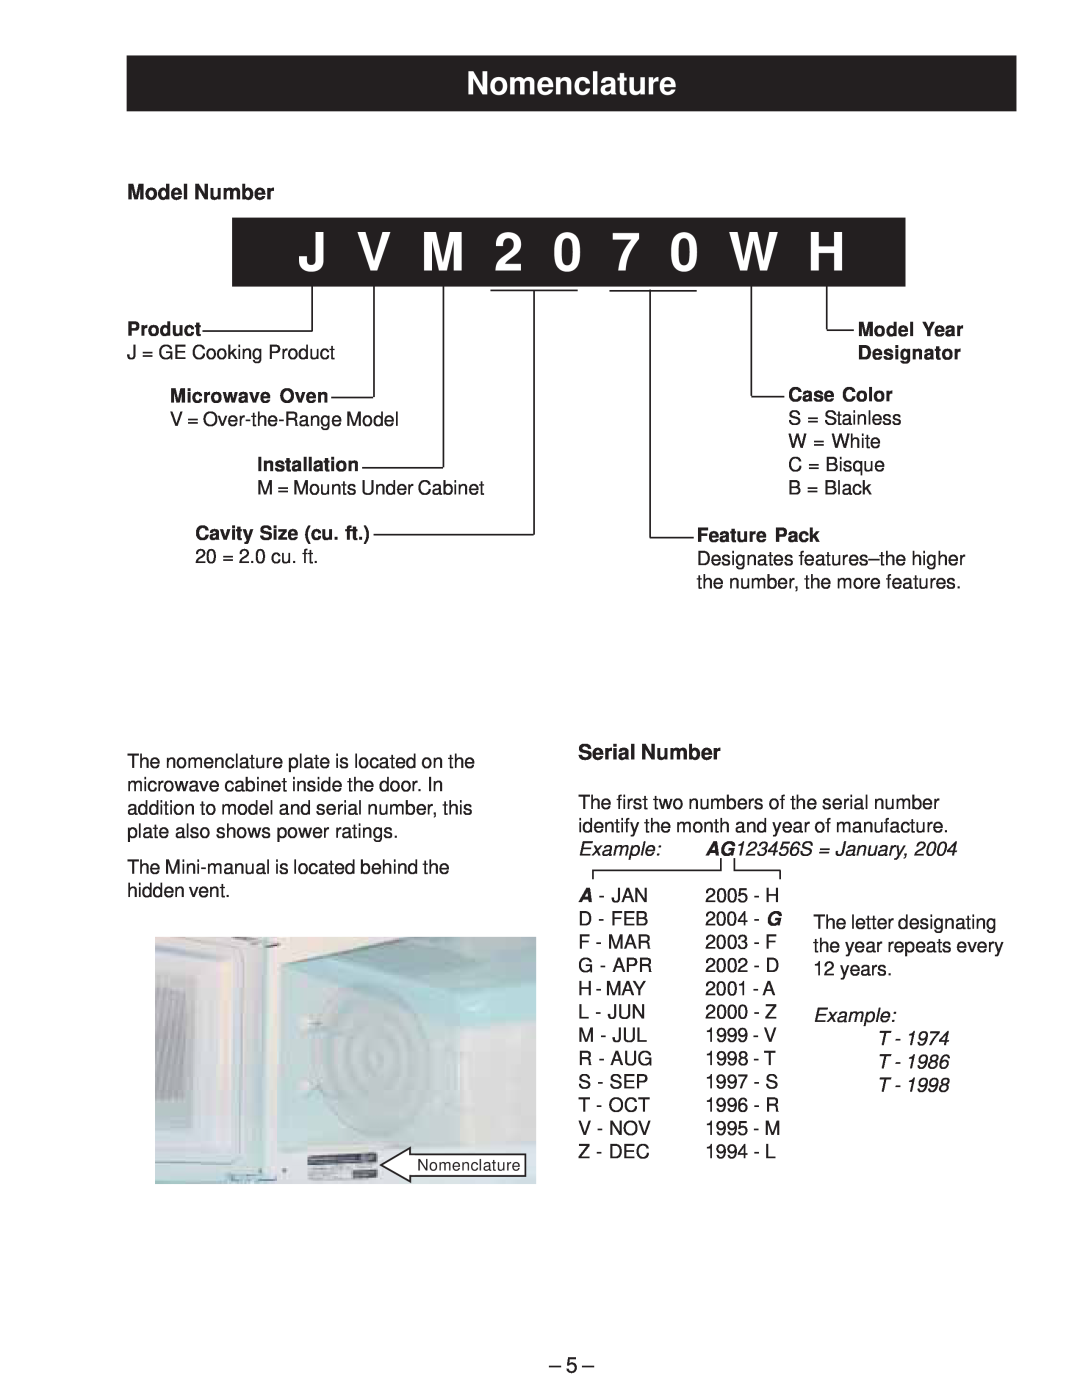 GE JVM2070_H Nomenclature, Model Number, Serial Number, Product, Microwave Oven, Installation, Feature Pack, Example T T T 